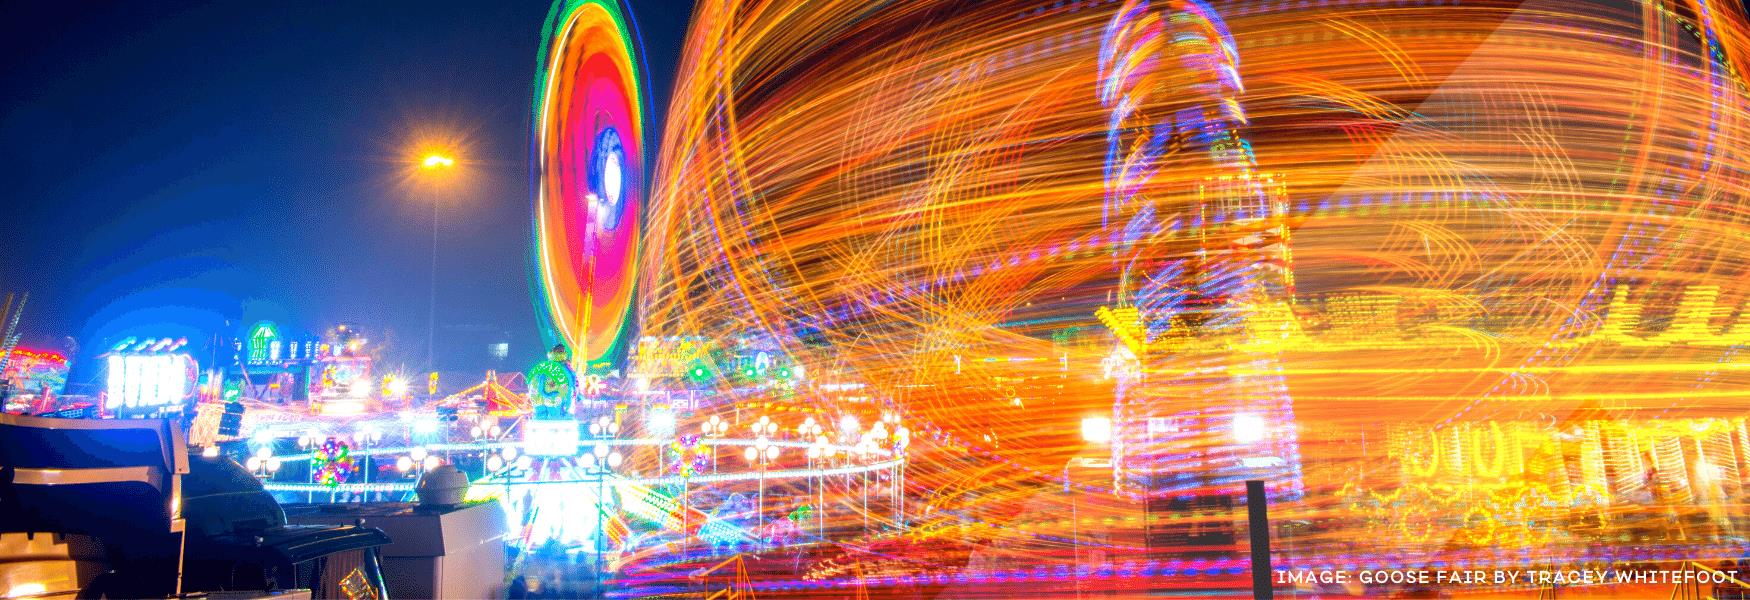 Goose Fair by Tracey Whitefoot